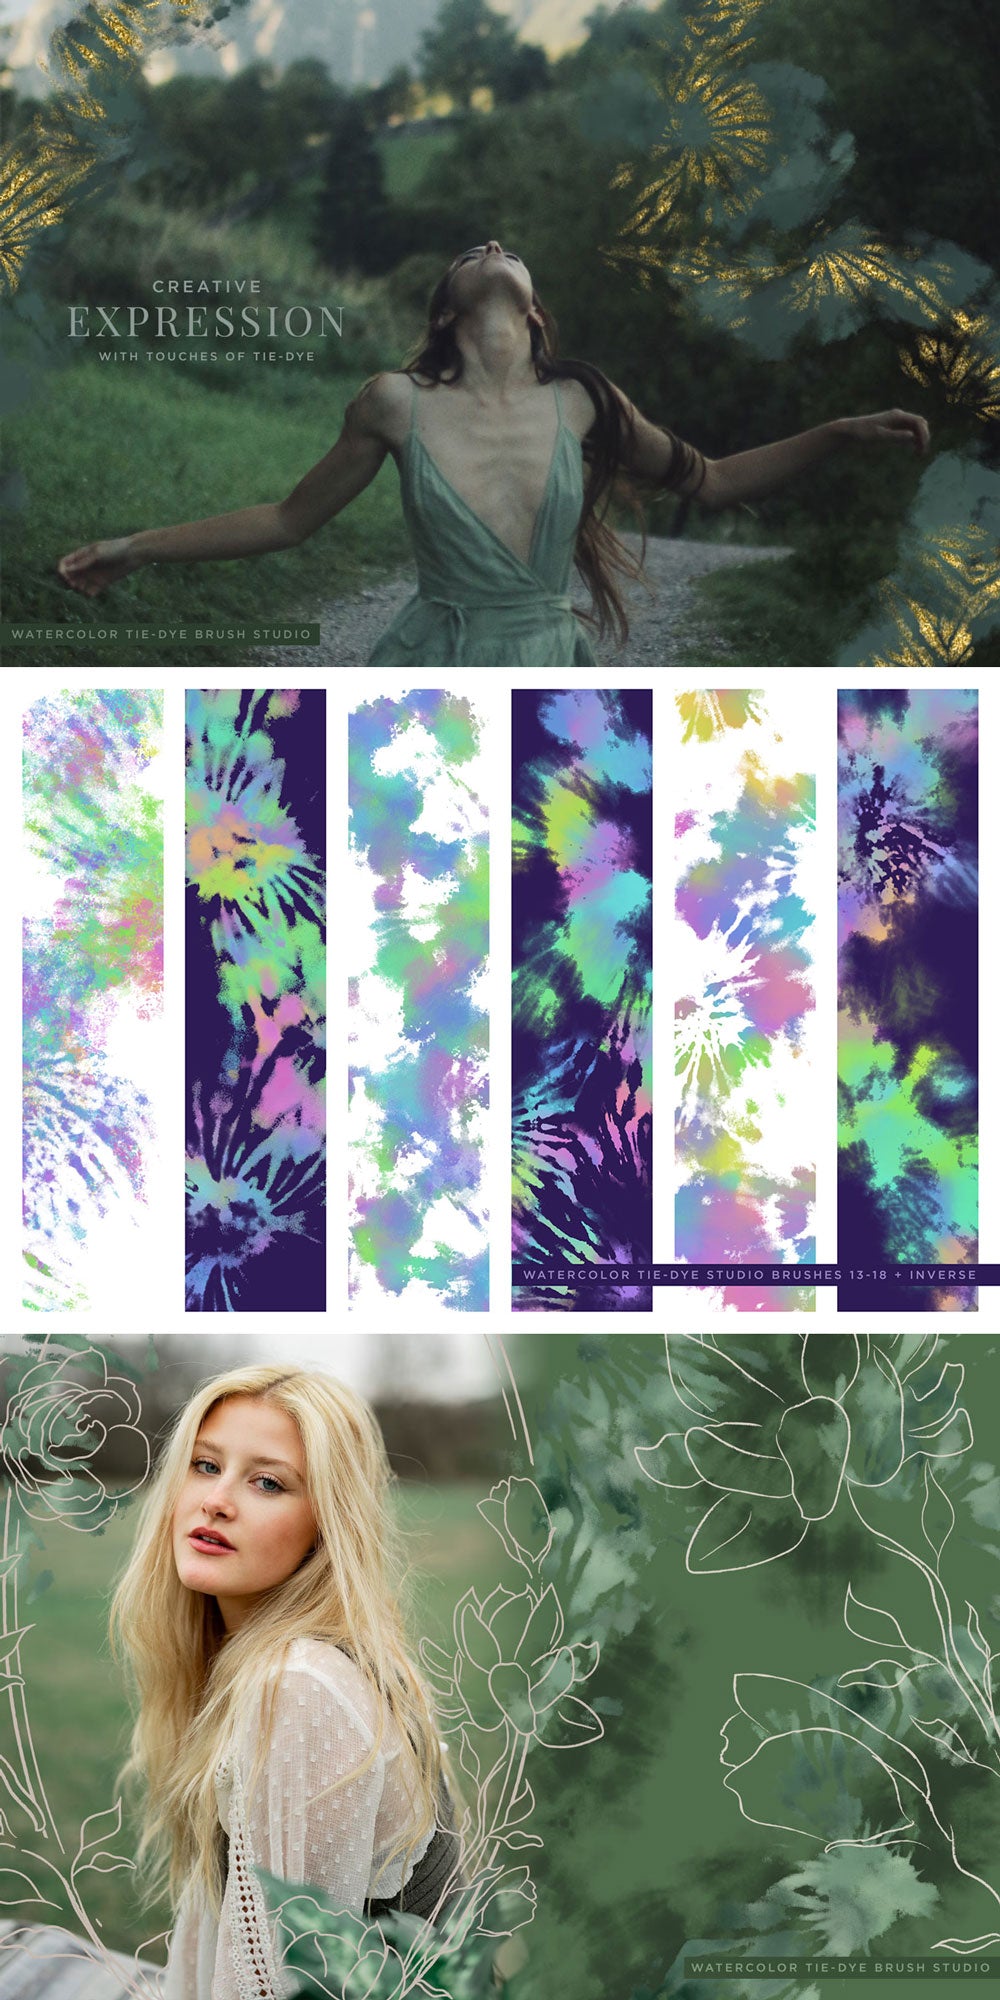 samples of digital tie-dye effects created with tie-dye photoshop brushes, photo overlays and brush samples